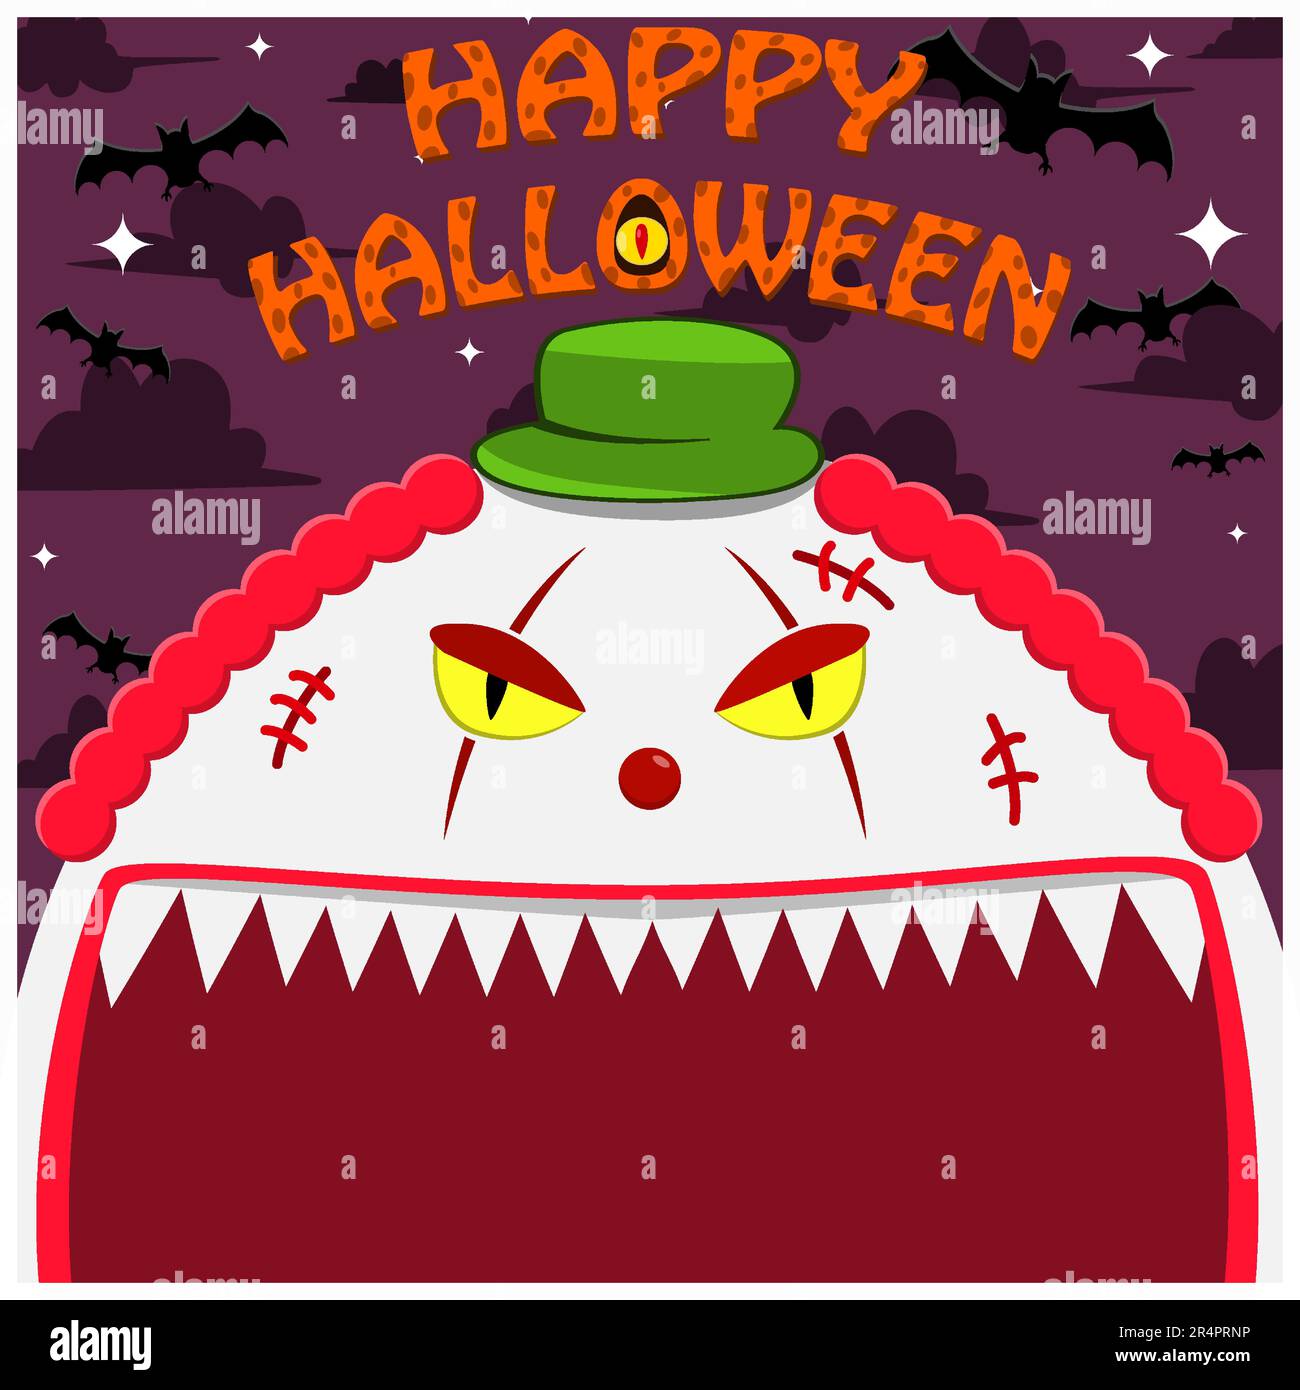 Halloween Character Design. With Creepy Clown Character. Big Face and Open Mouth. In Gravefield. Vector And Illustration Stock Vector